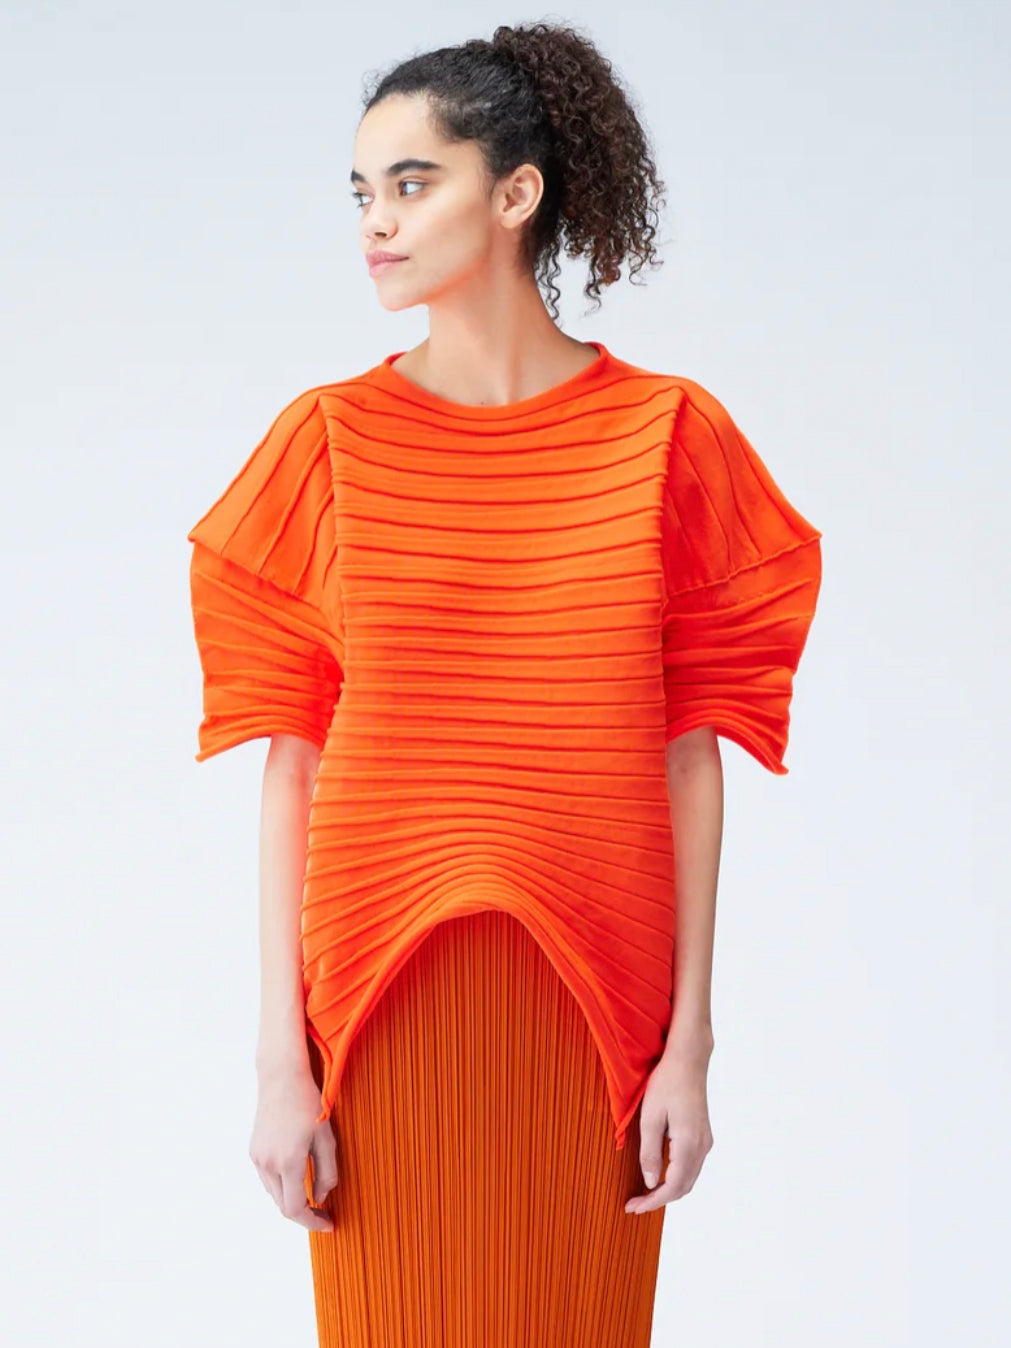 Short-sleeved knitted top, bright orange